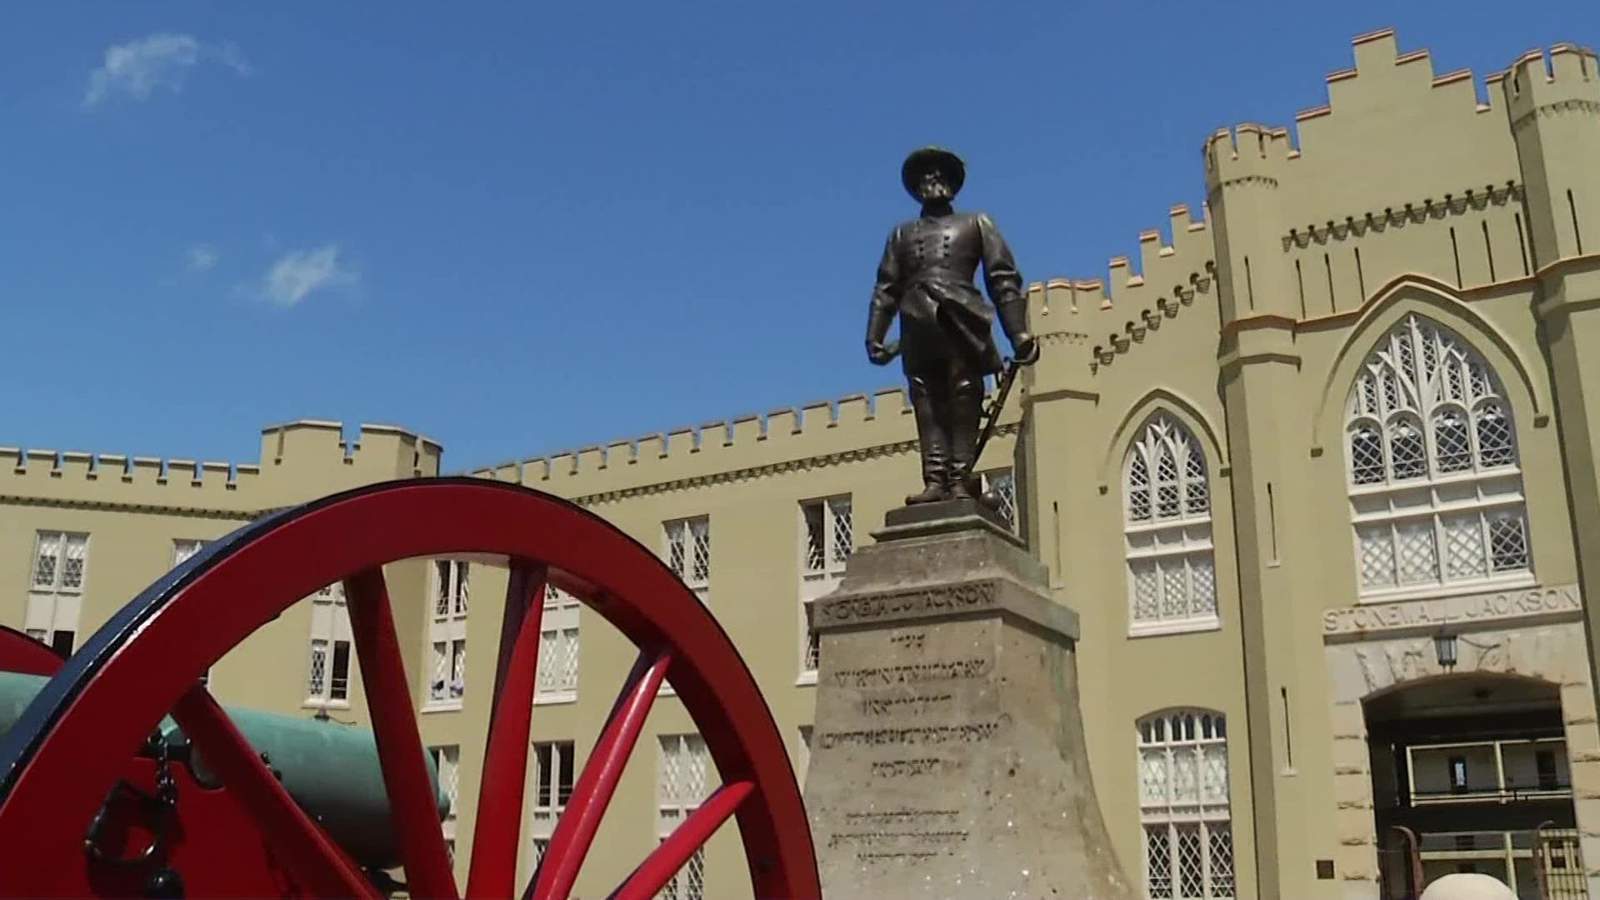 VMI will not remove Confederate statues or rename buildings